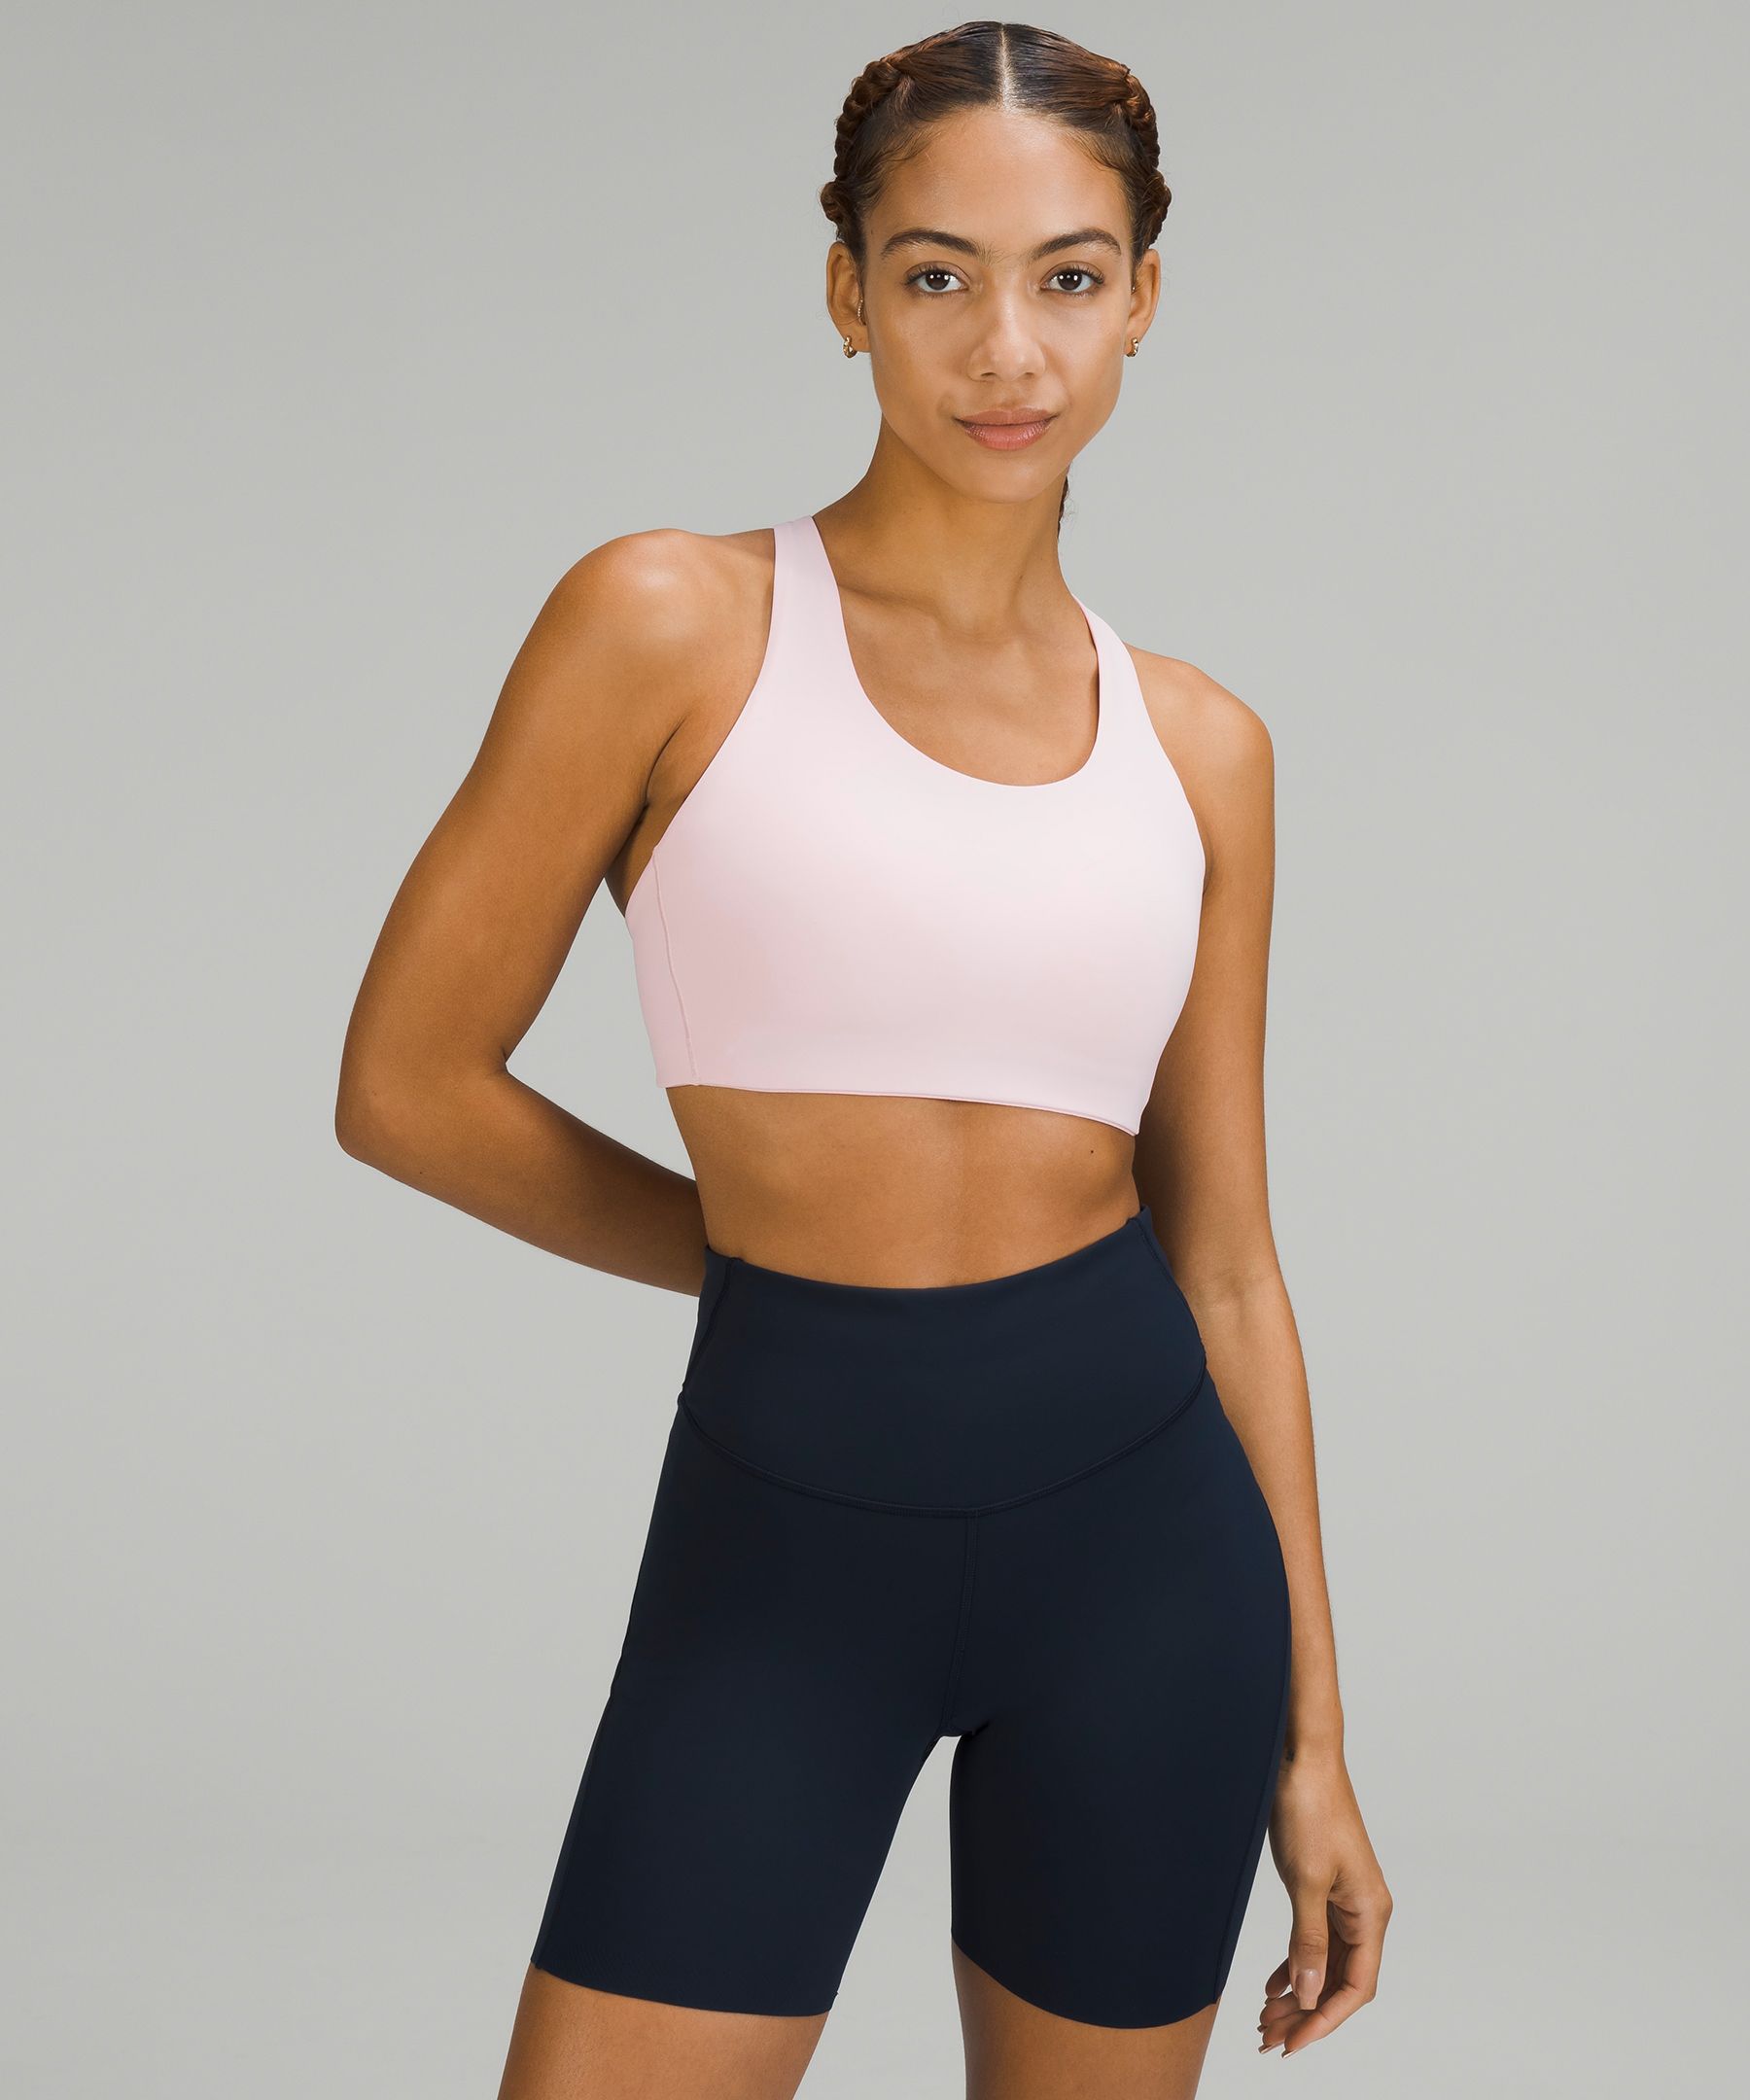 Lululemon Free to Be Elevated Bra *Light Support, DD/DDD(E) Cup